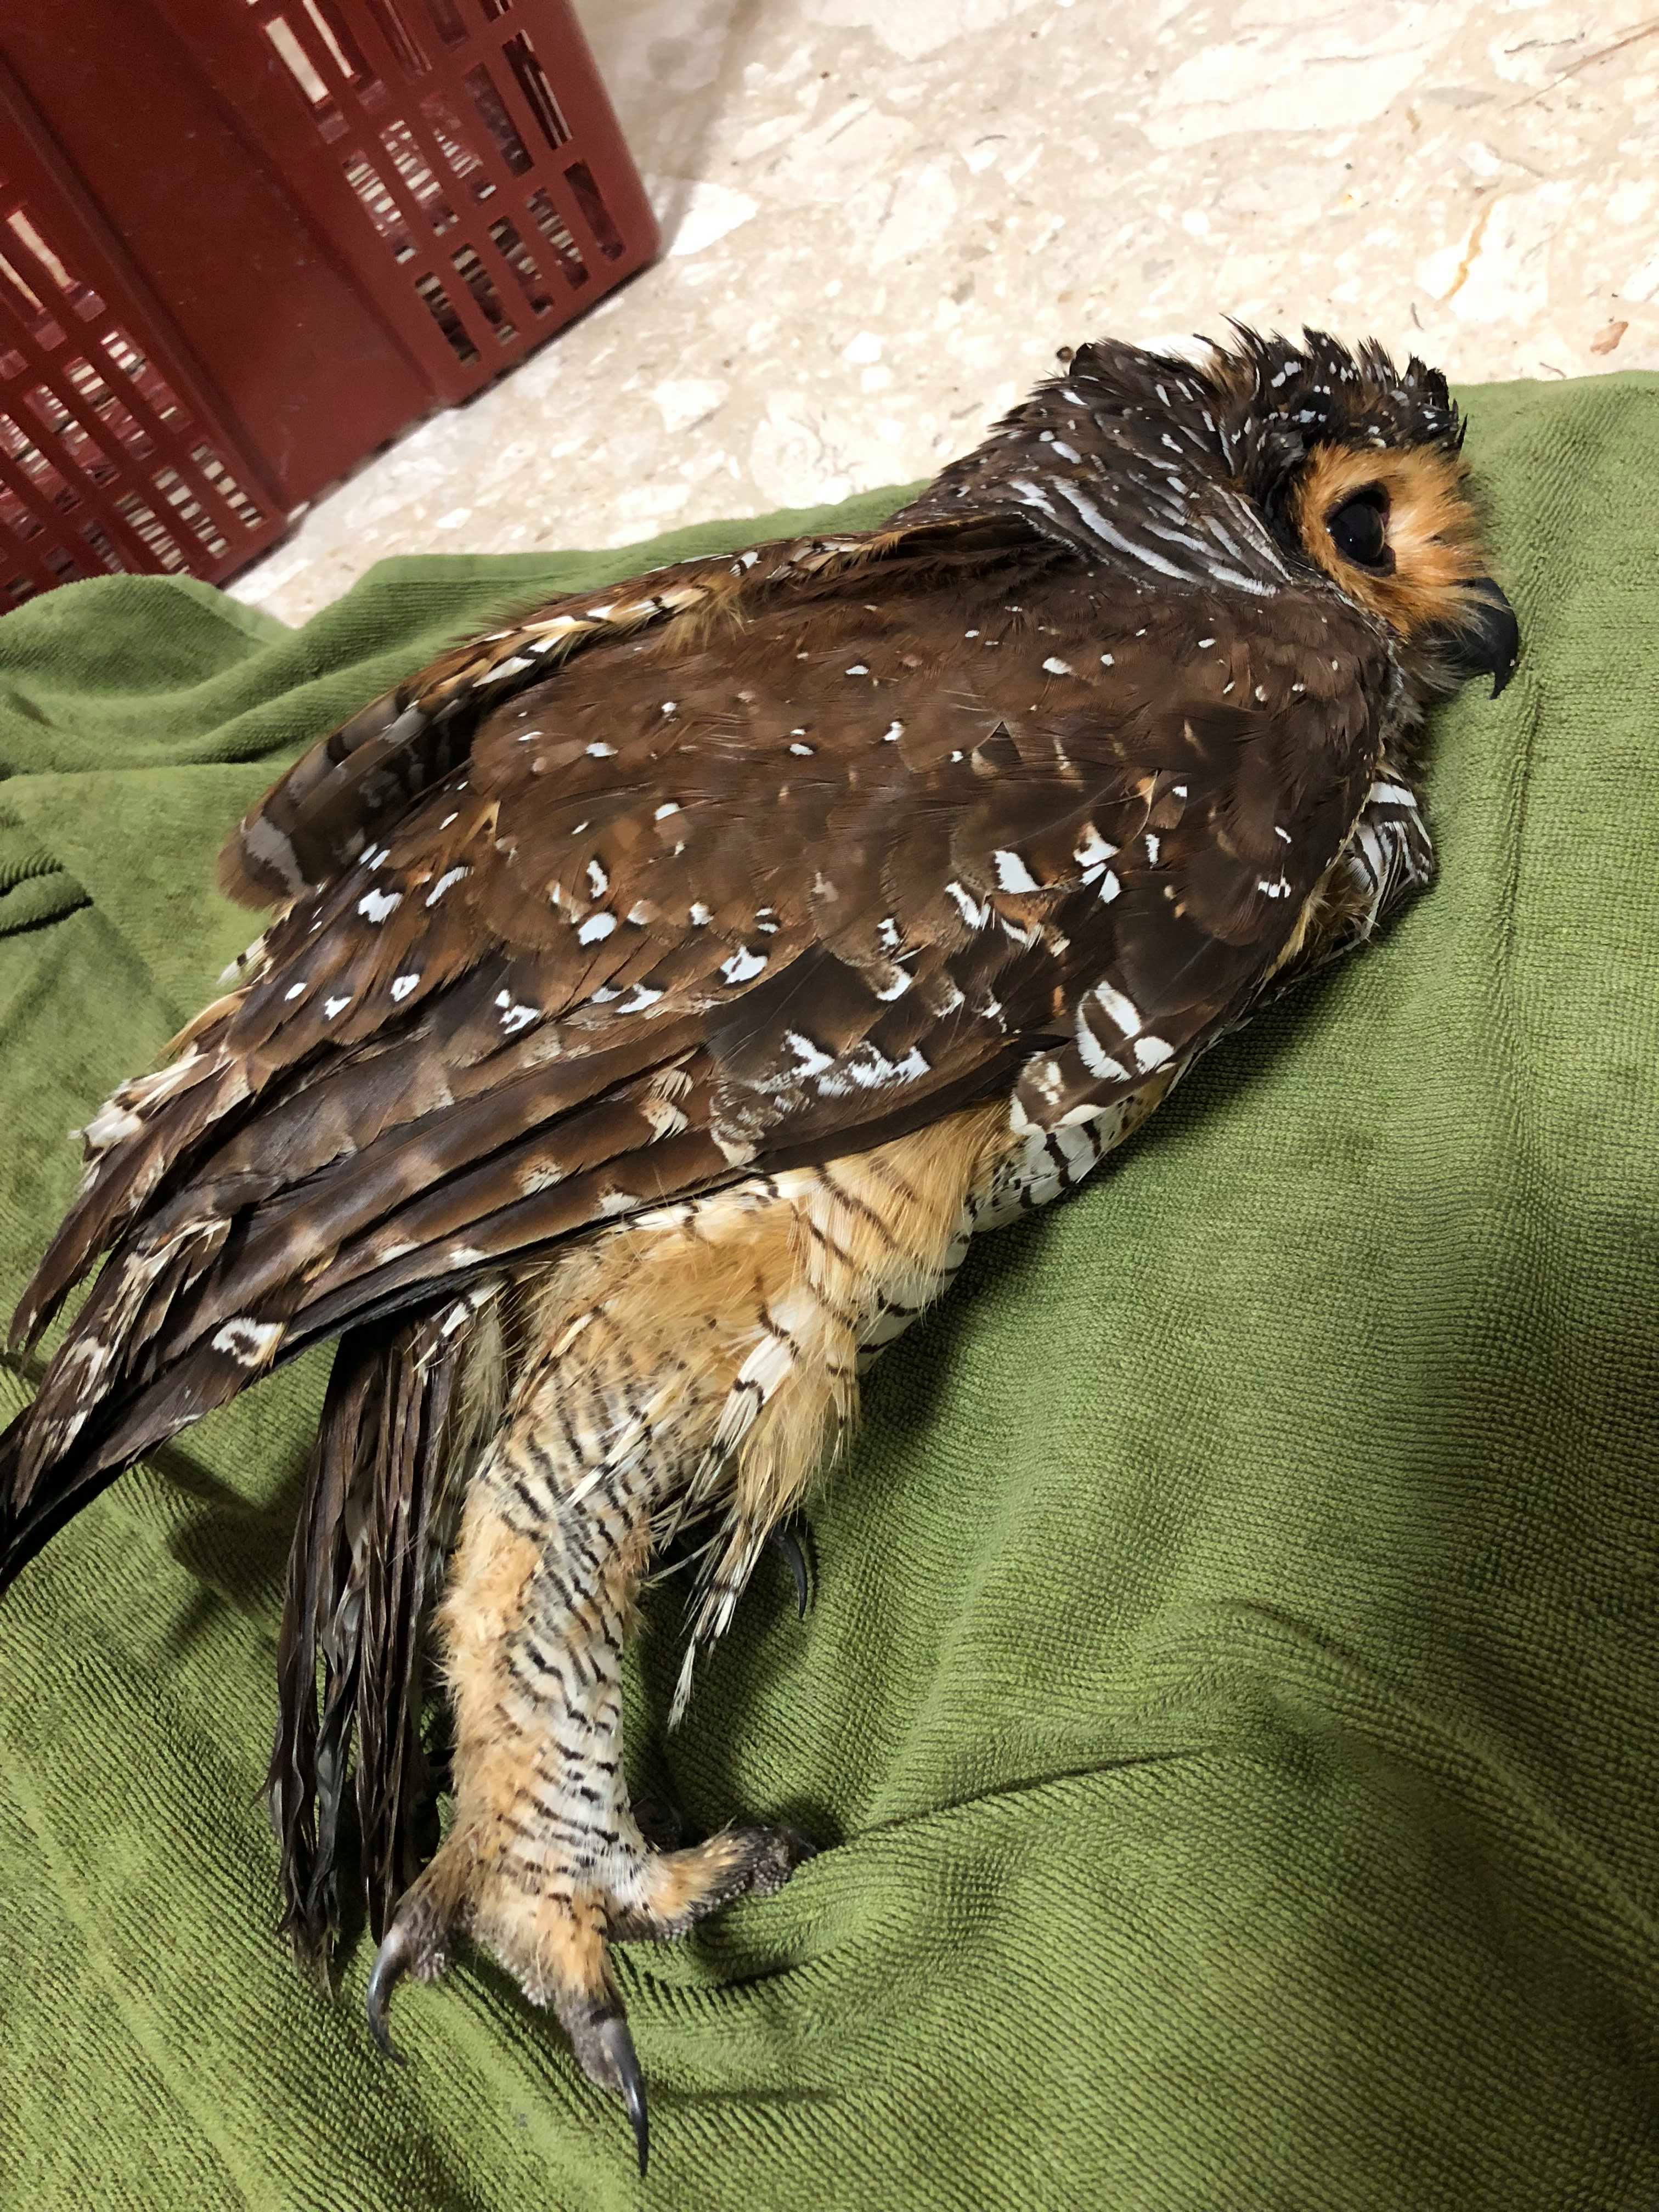 Nationally endangered owl flies into HDB window in Jurong West, injures ...